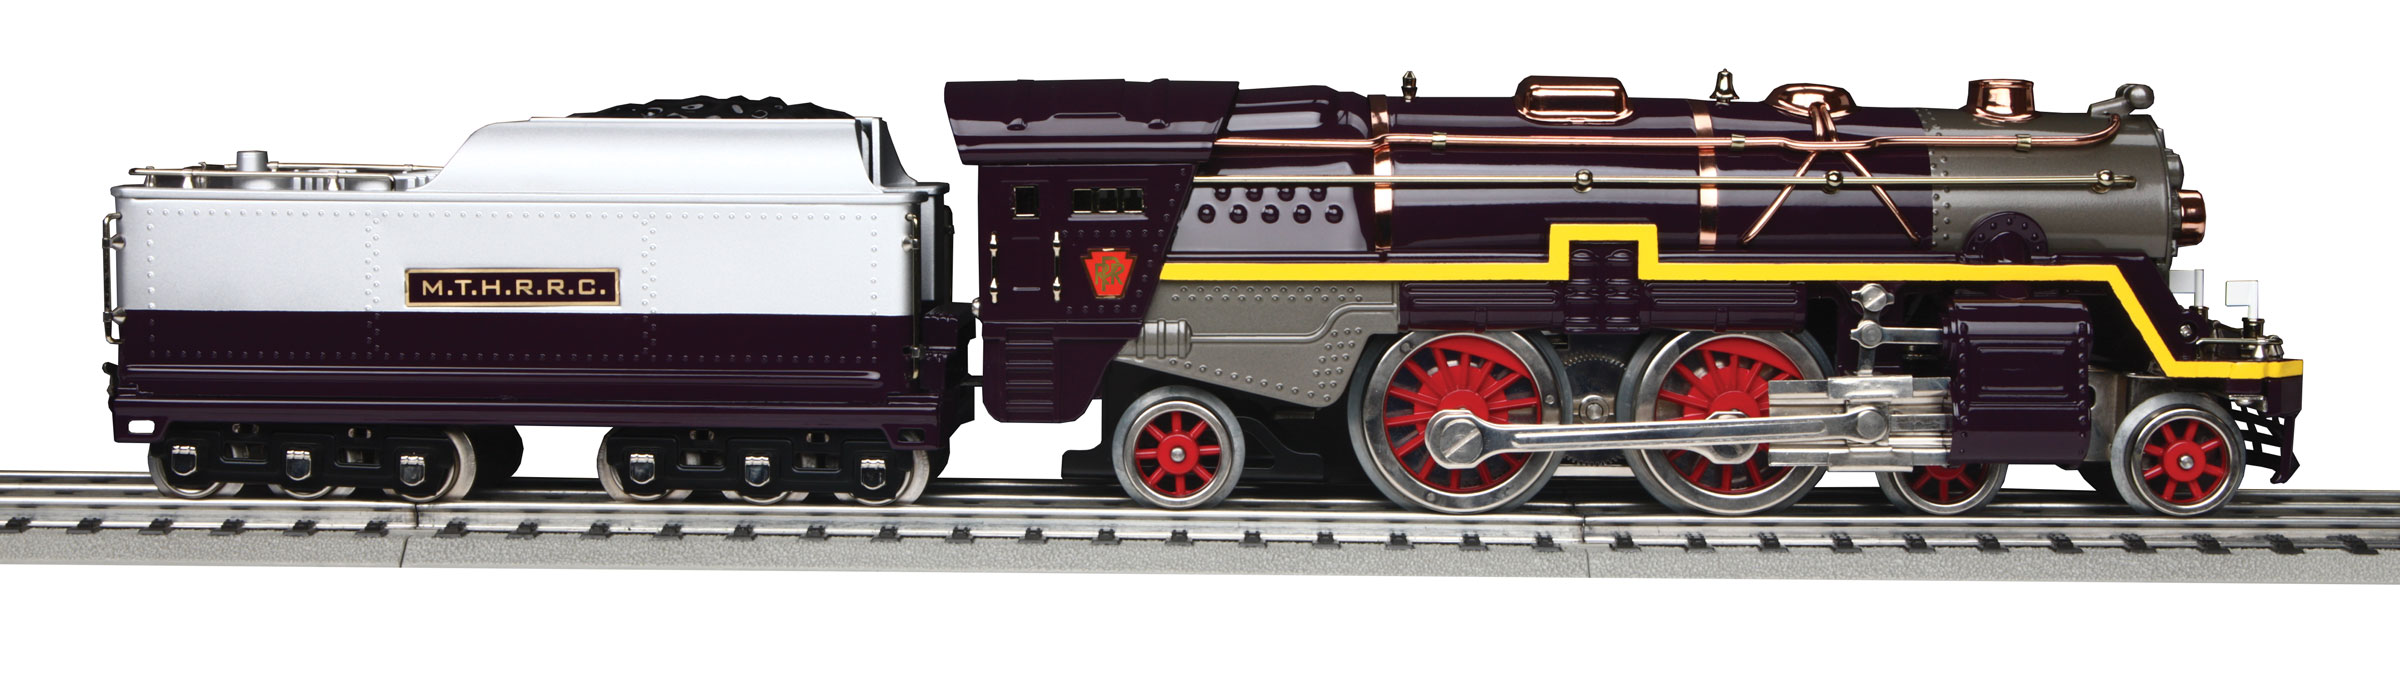 mth tinplate traditions